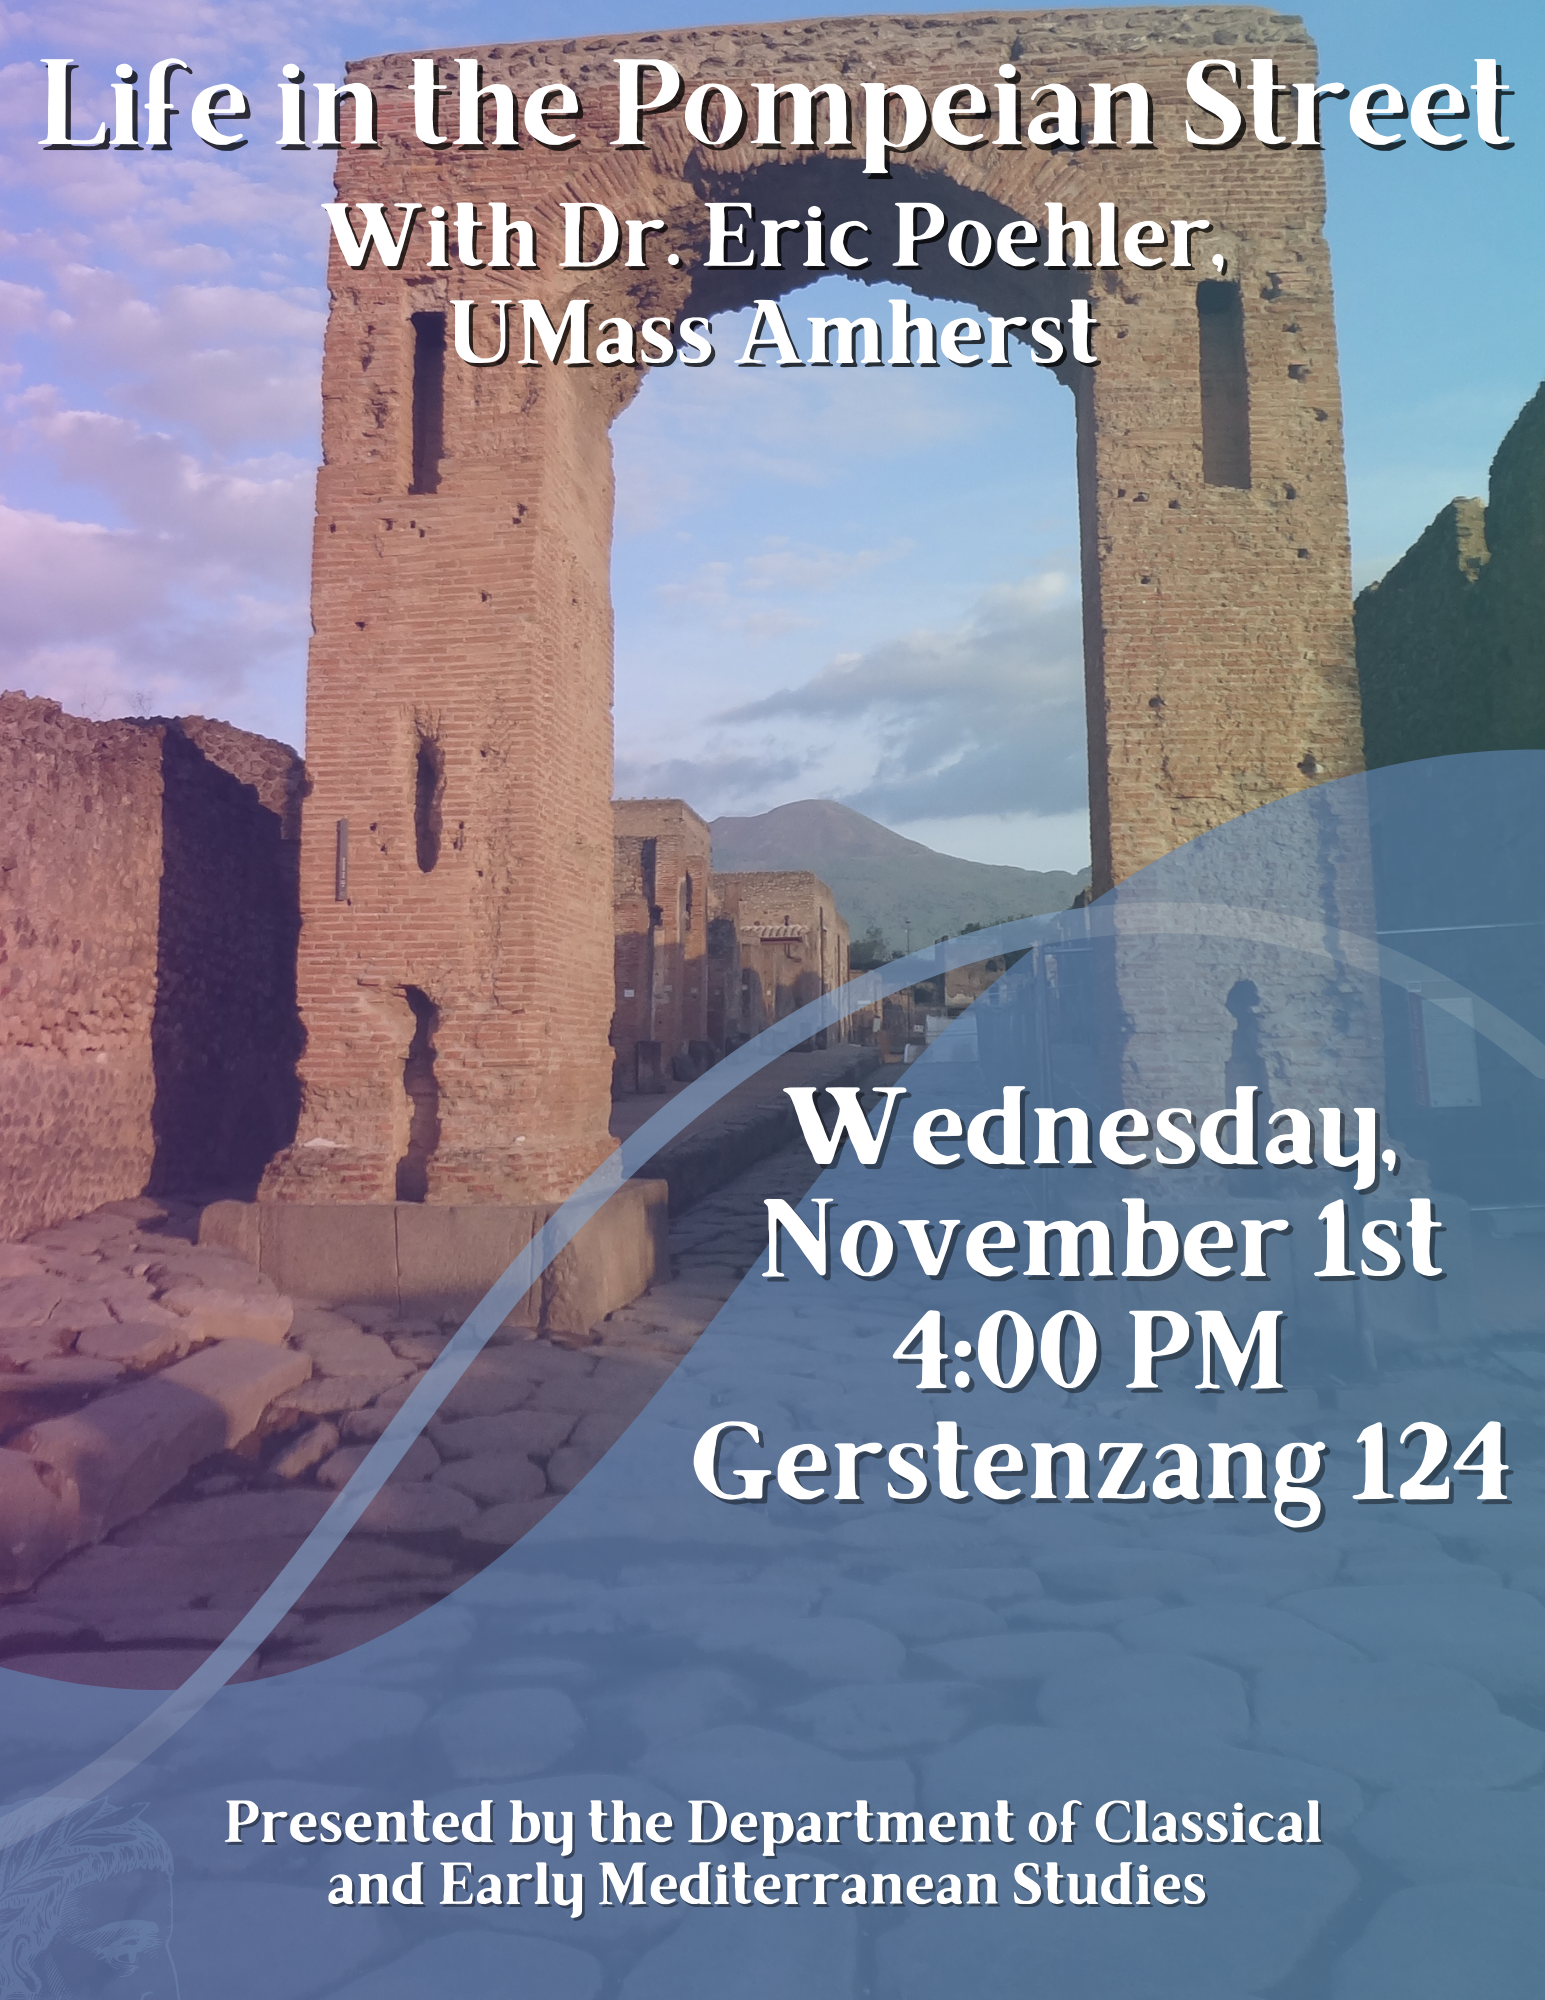 Life in the Pompeian Street, with Dr. Eric Poehler, from UMass Amherst. On Wednesday, November 1st at 4:00 PM, at Gerstenzang 124. Presented by the Department of Classical and Early and Mediterranean Studies. 